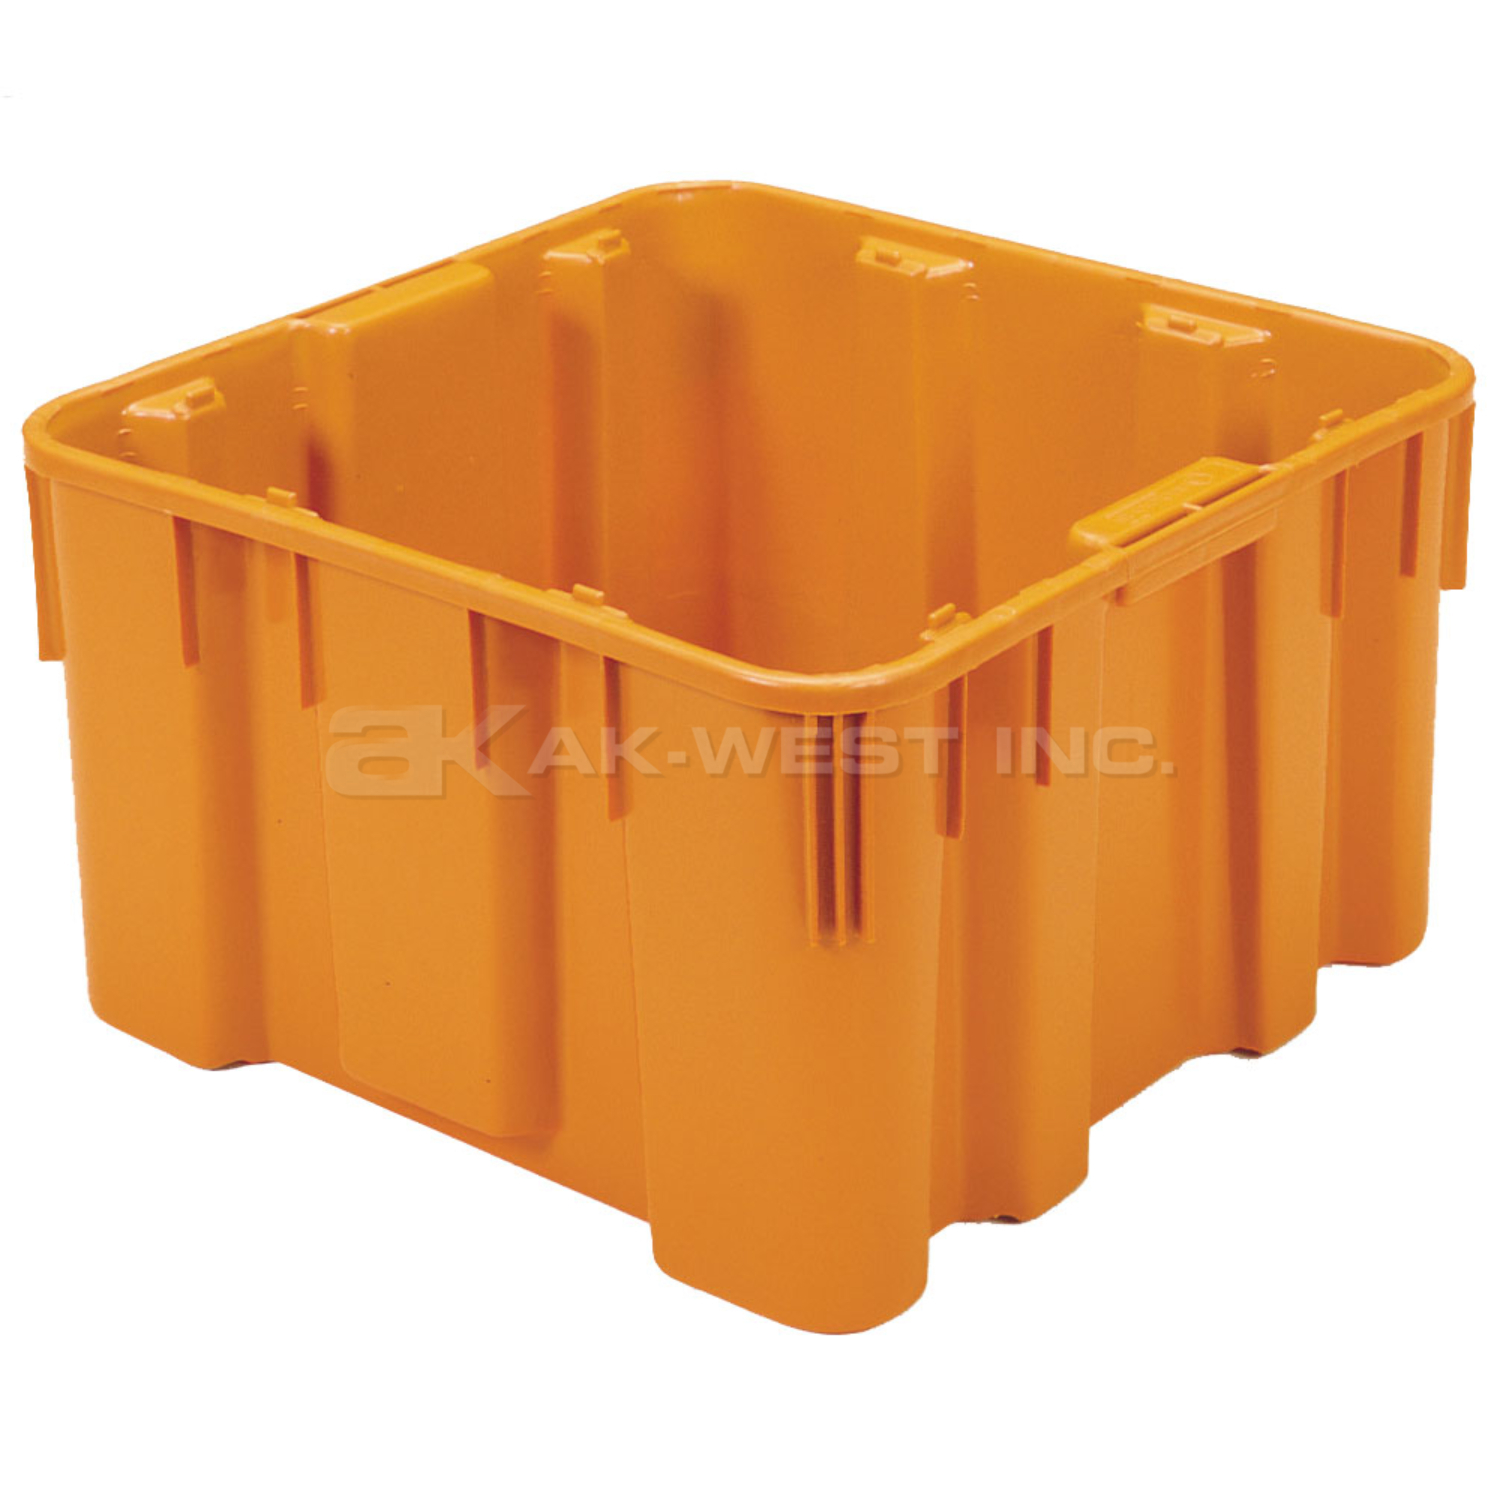 Orange, 19" x 19" x 10-1/2", Stack and Nest Container, w/ Holes